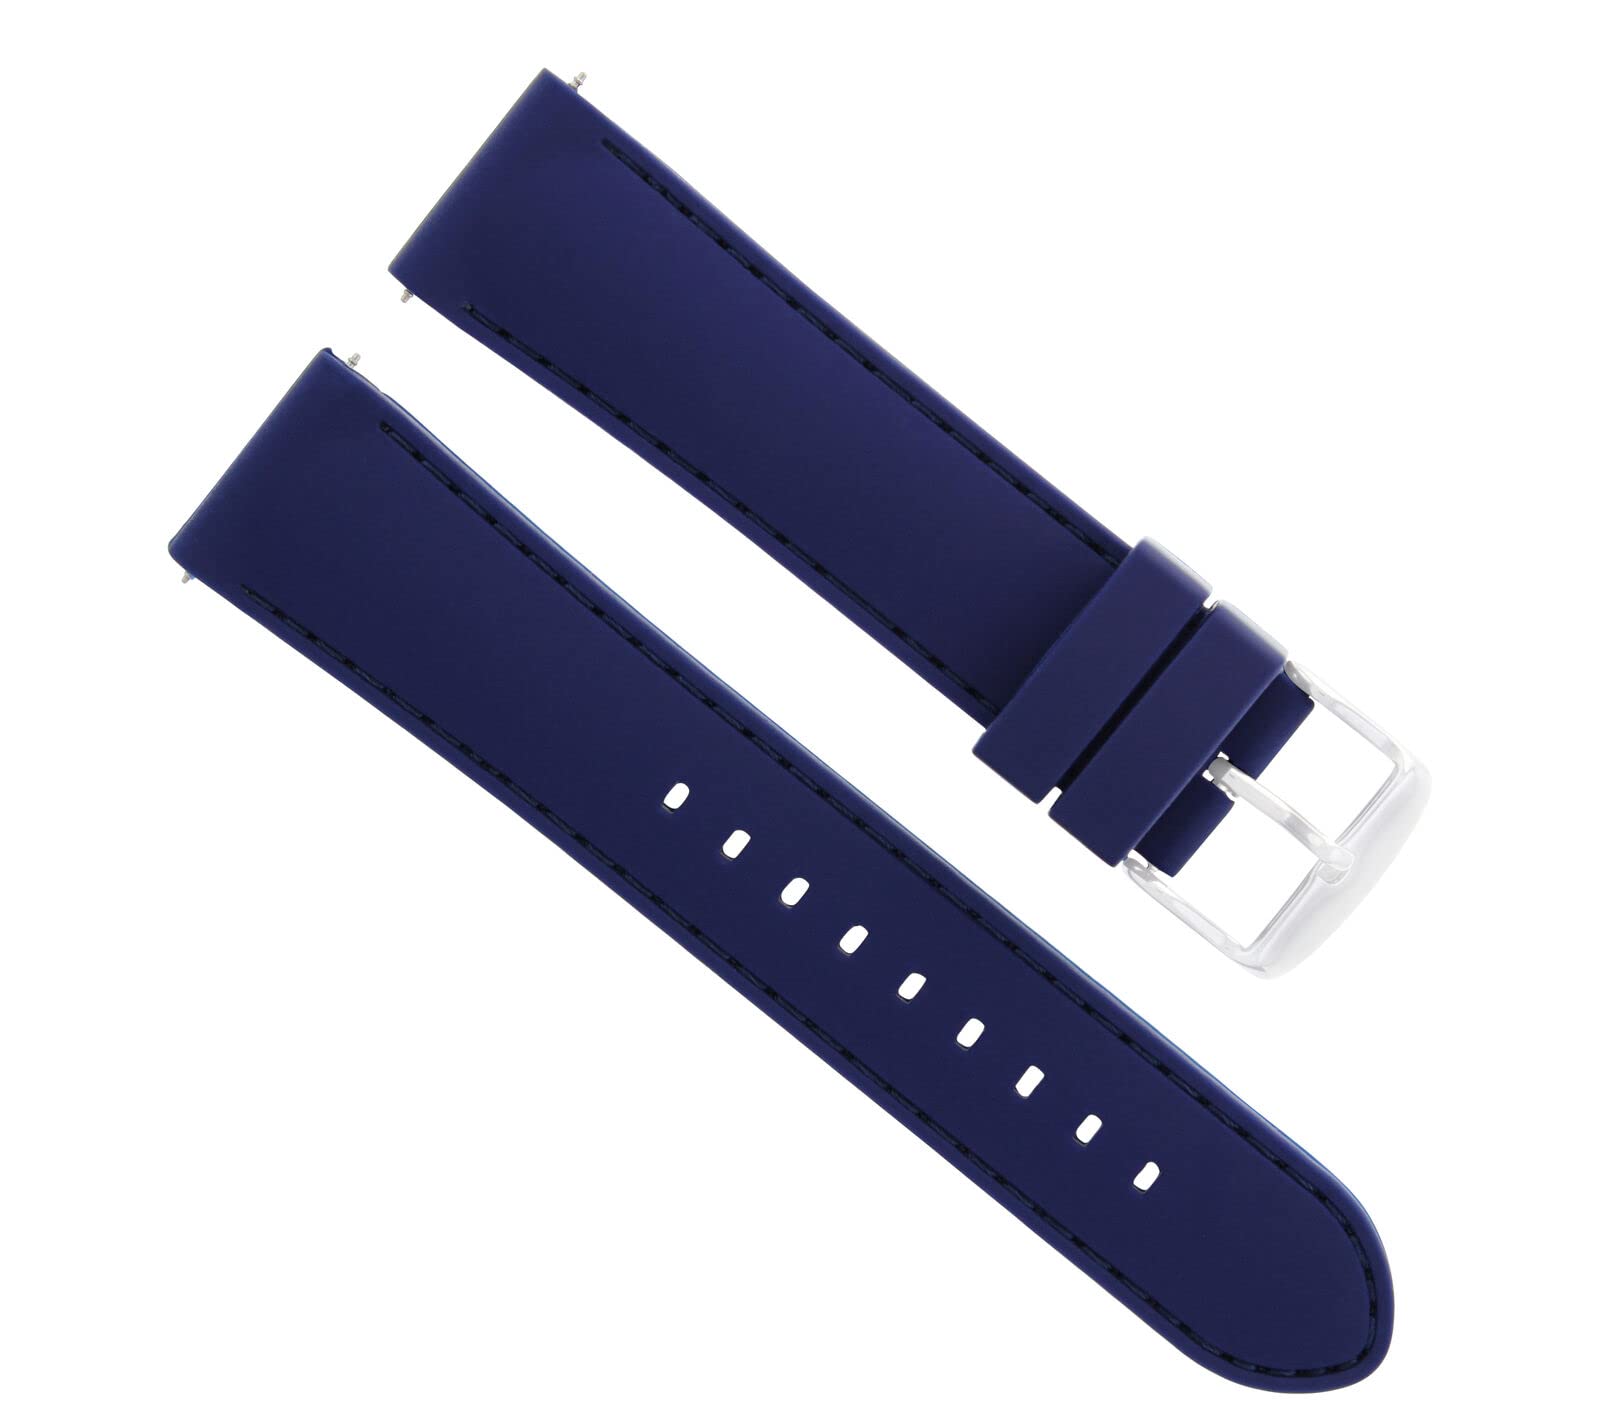 Ewatchparts 22MM RUBBER DIVER WATCH BAND STRAP COMPATIBLE WITH BULOVA 96C121 MARINE CHRONOGRAPH BLUE